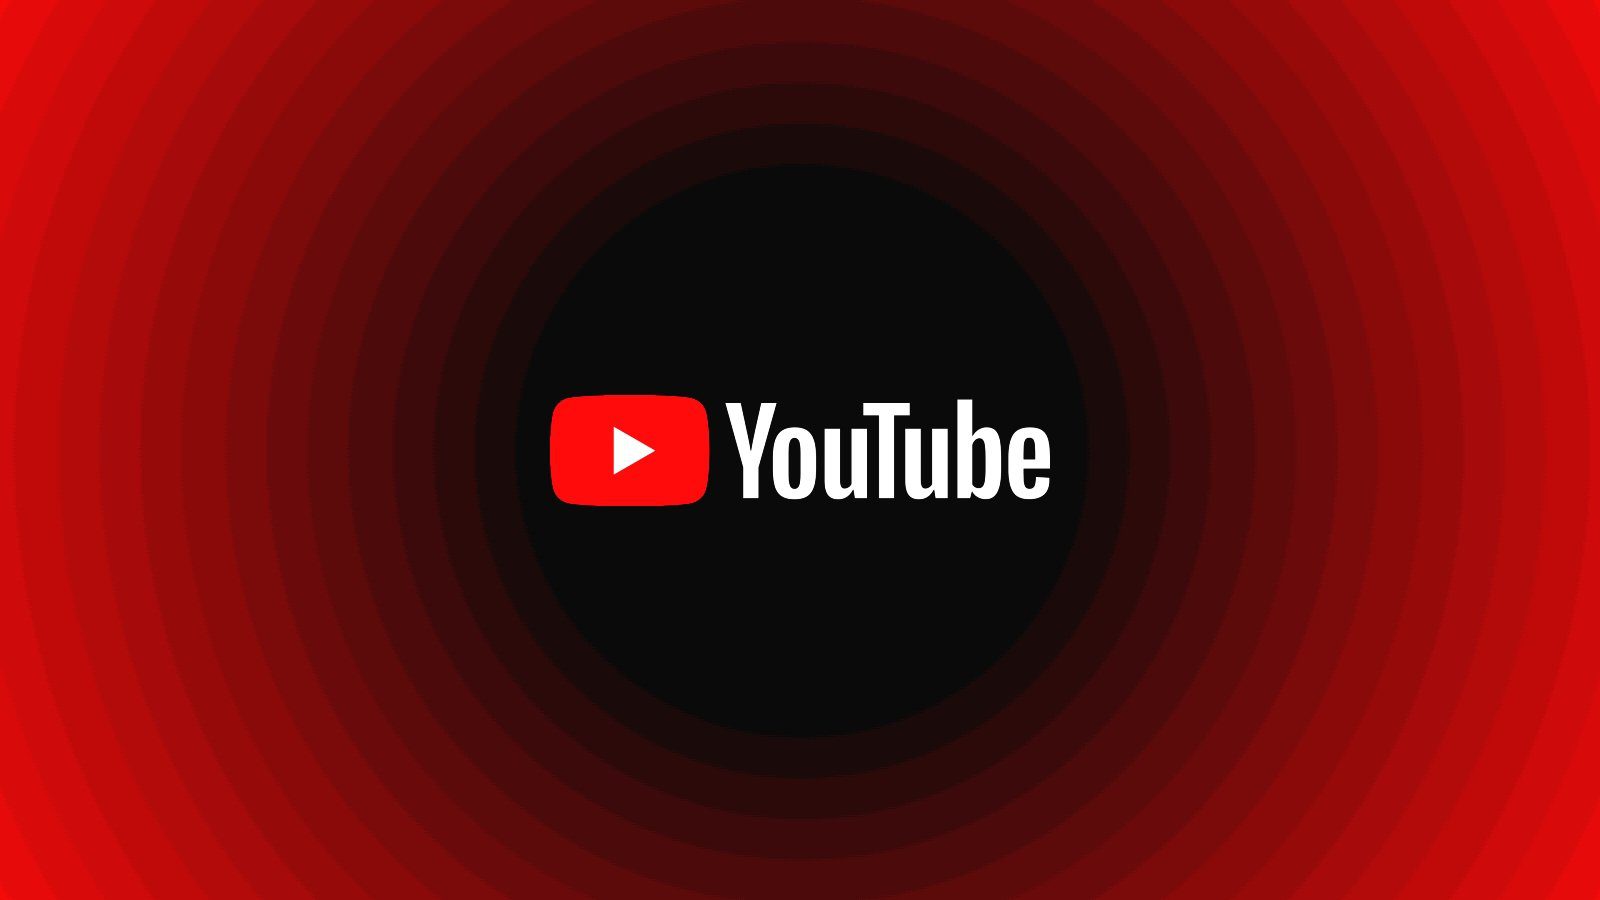 YouTube tests blocking videos unless you disable ad blockers – Source: www.bleepingcomputer.com